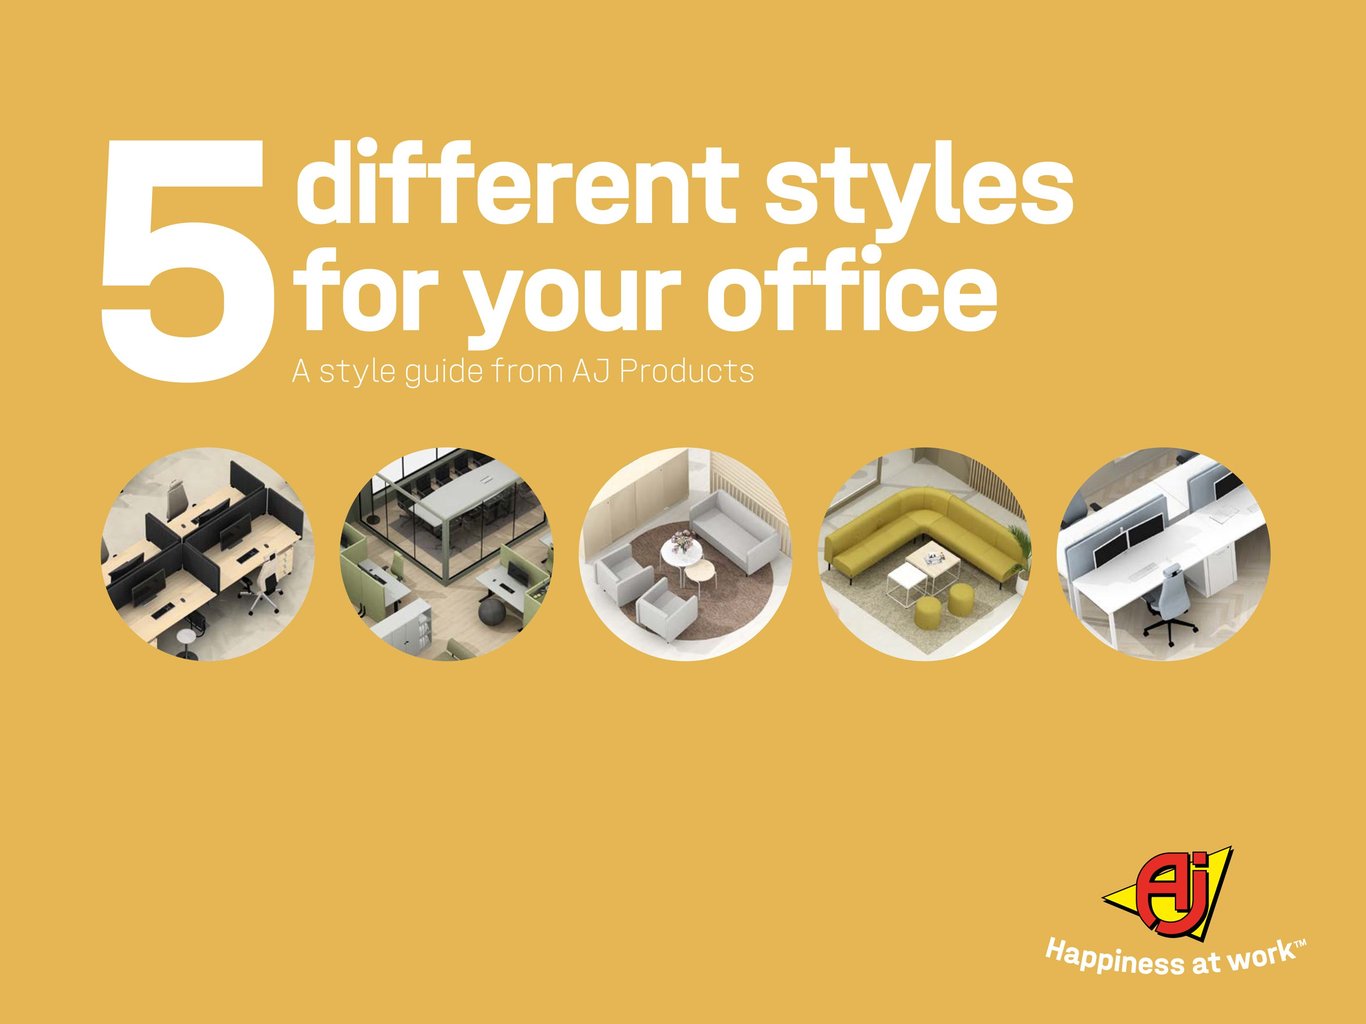 Brochure cover showing 5 office designs